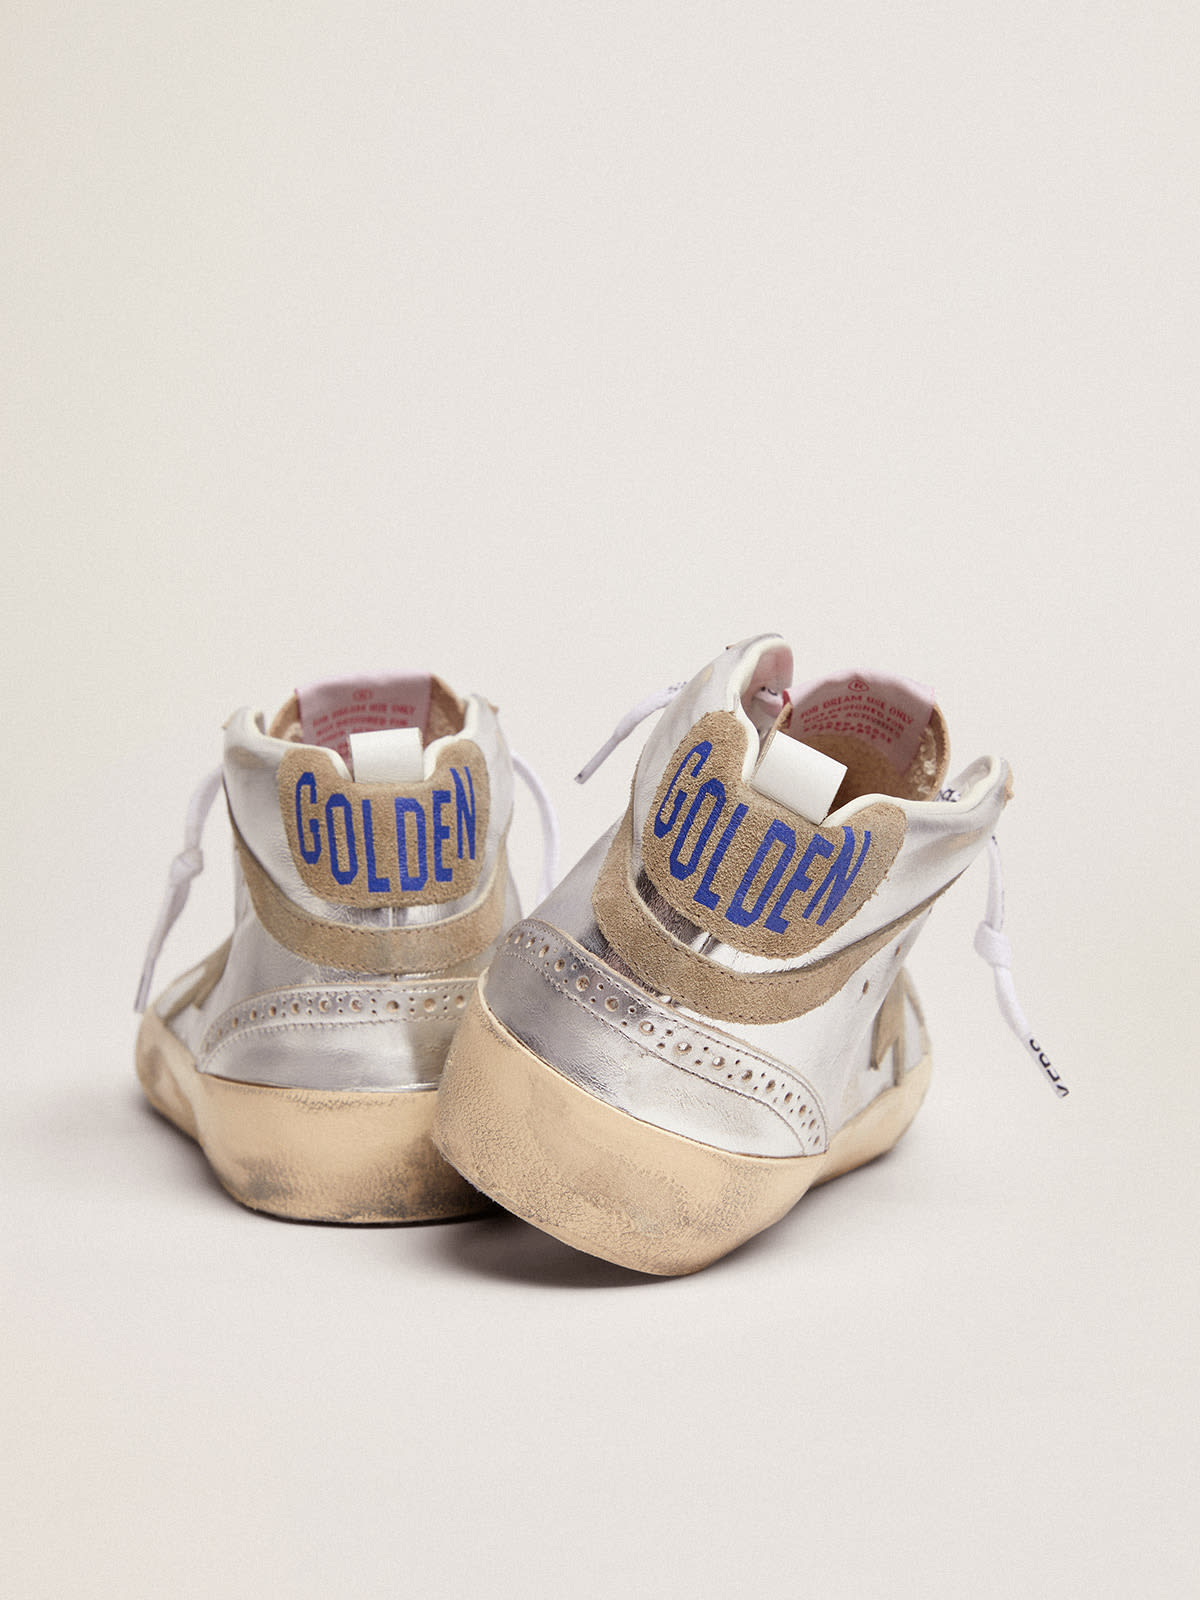 Golden Goose - Men's Mid Star in silver laminated leather with dove gray star and flash in 